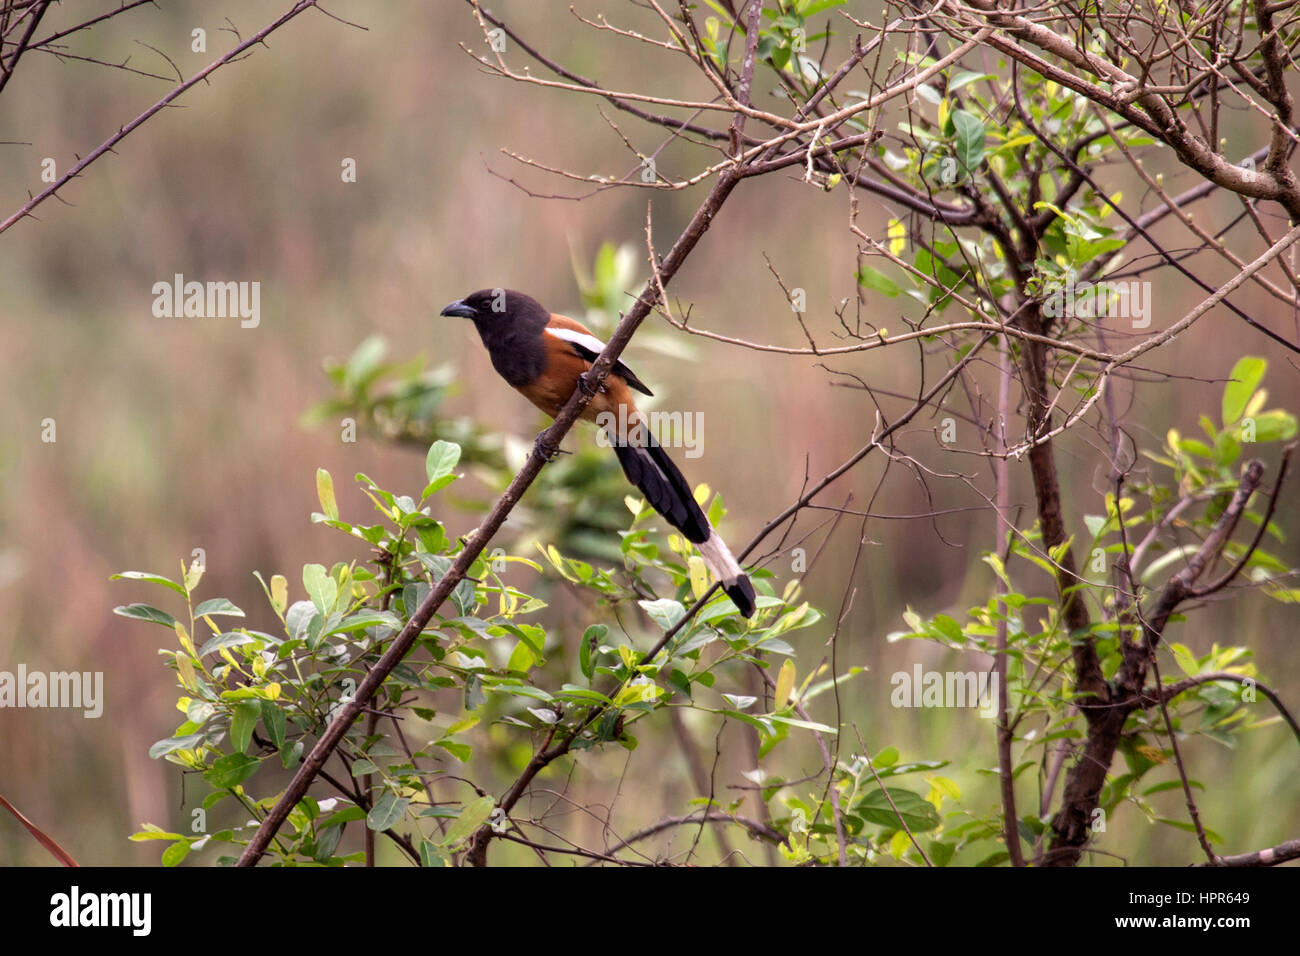 Rufous treepie perched in tree in India Stock Photo